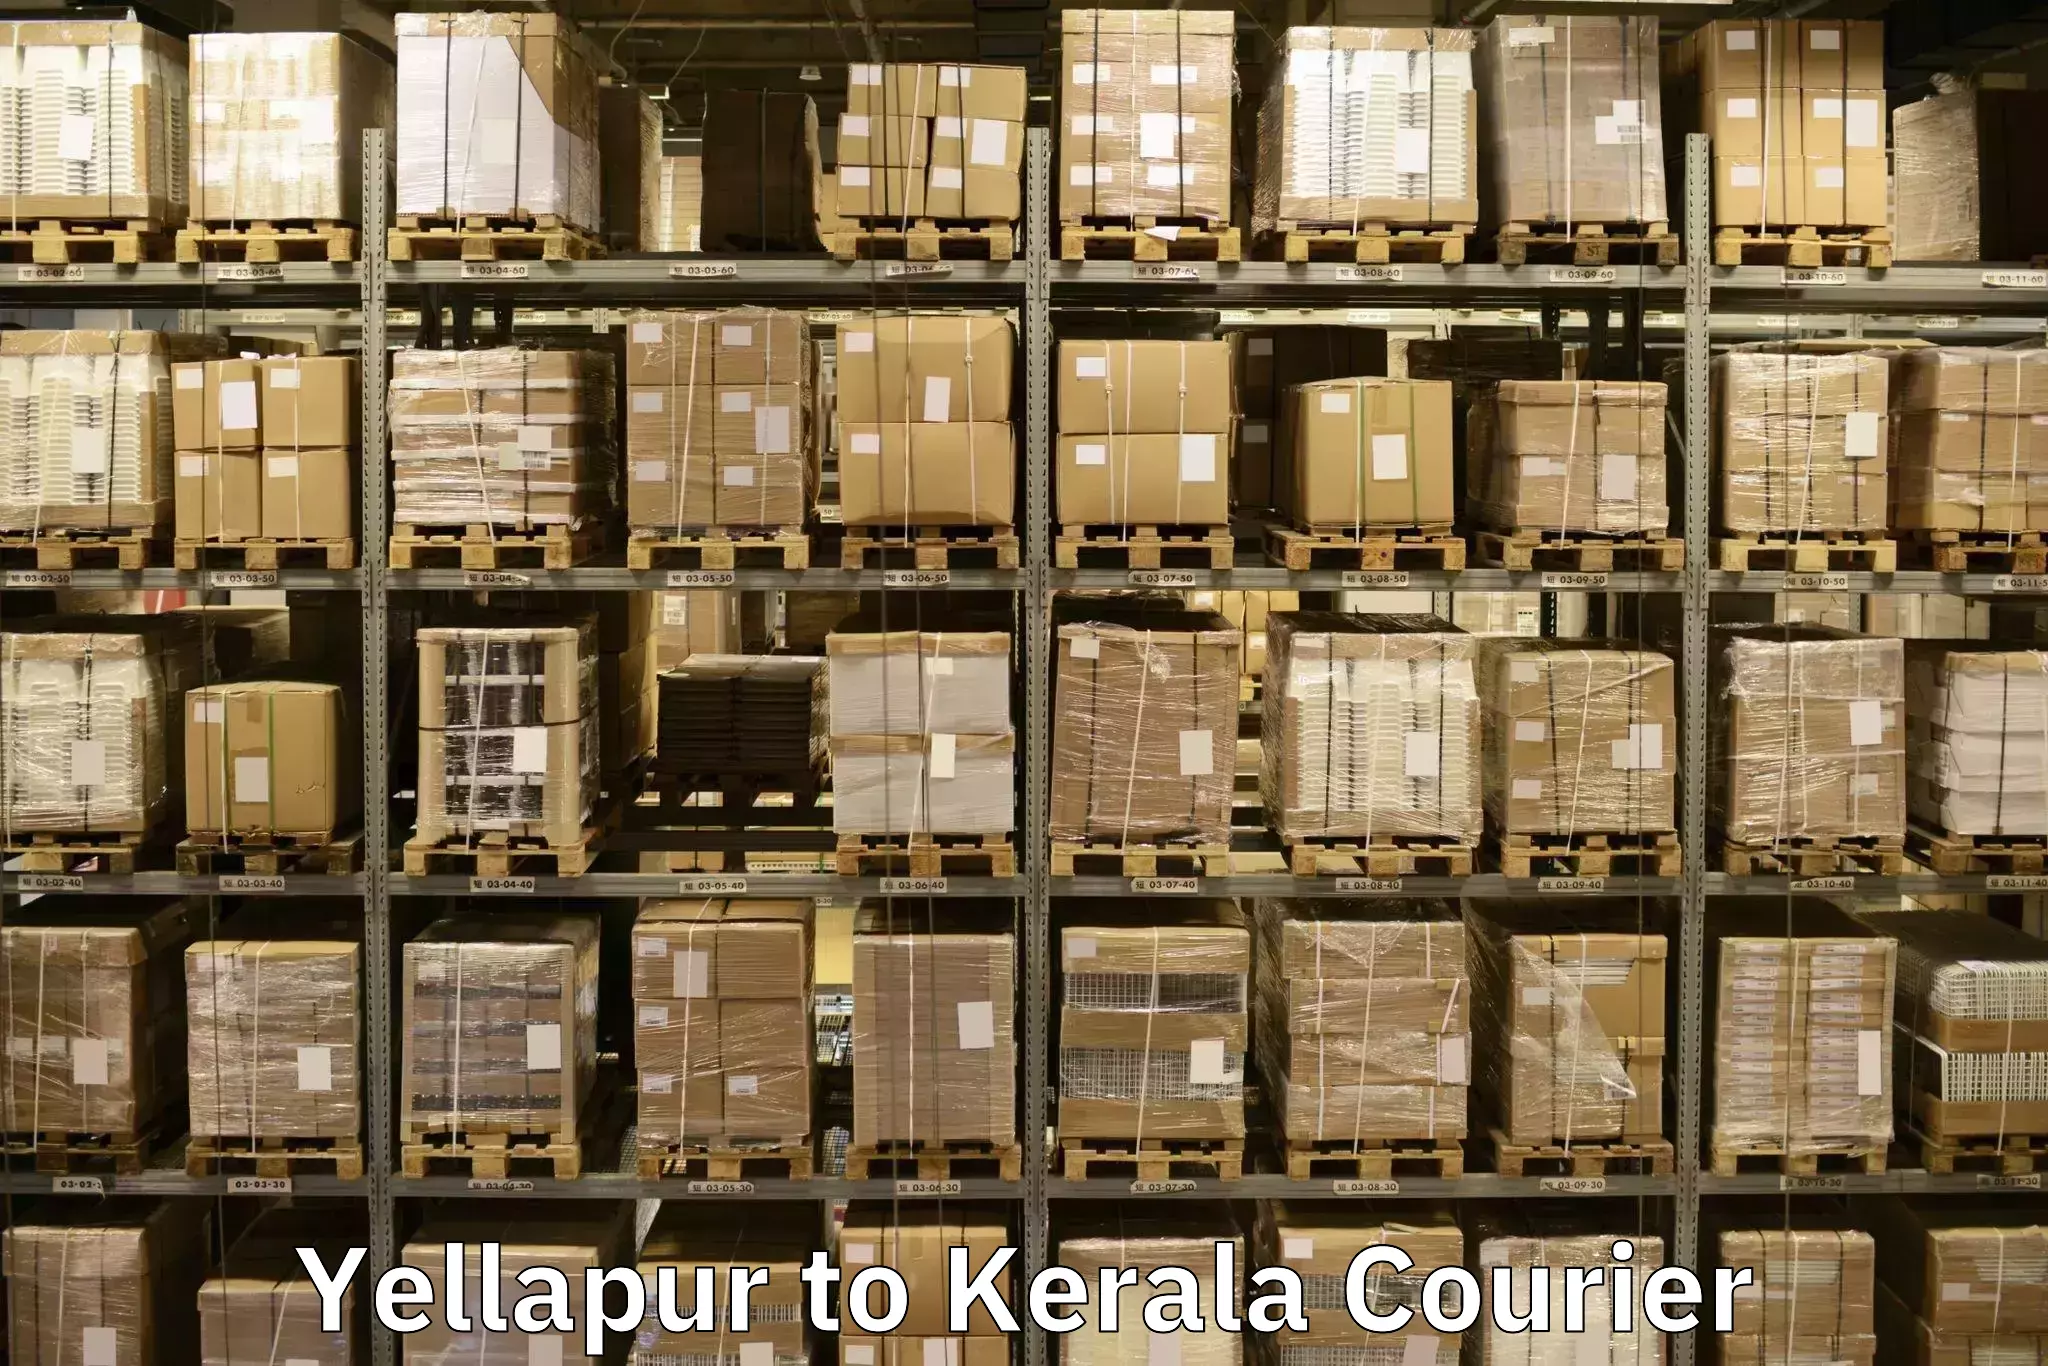 Home shifting experts Yellapur to Thrissur